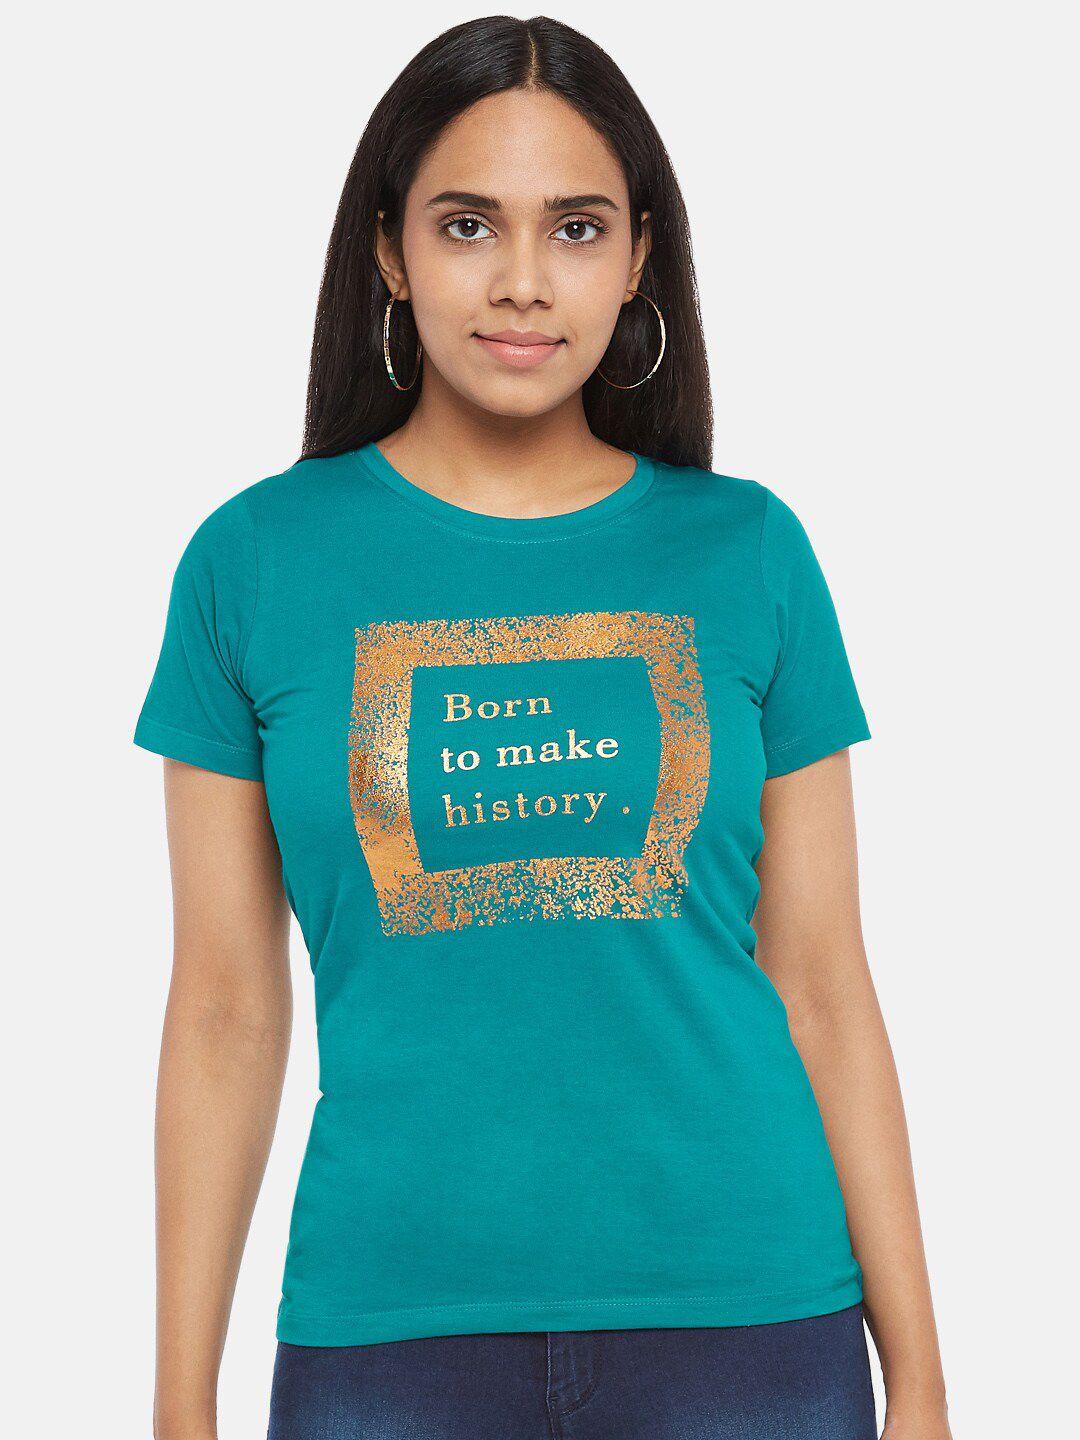 honey by pantaloons women teal blue & gold-toned typography pure cotton t-shirt